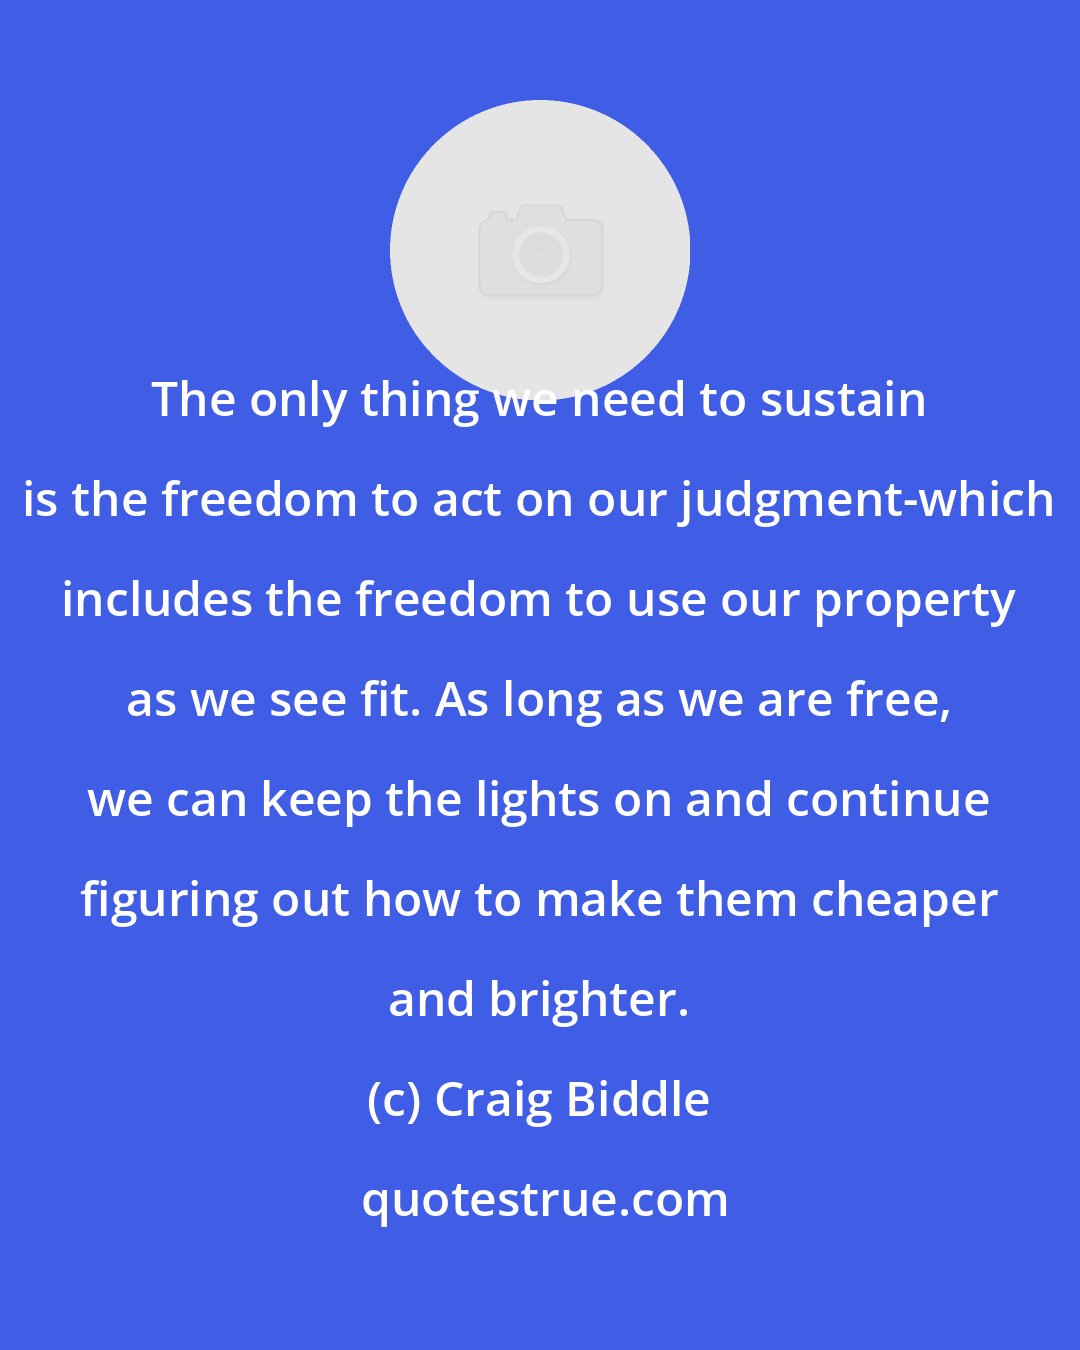 Craig Biddle: The only thing we need to sustain is the freedom to act on our judgment-which includes the freedom to use our property as we see fit. As long as we are free, we can keep the lights on and continue figuring out how to make them cheaper and brighter.